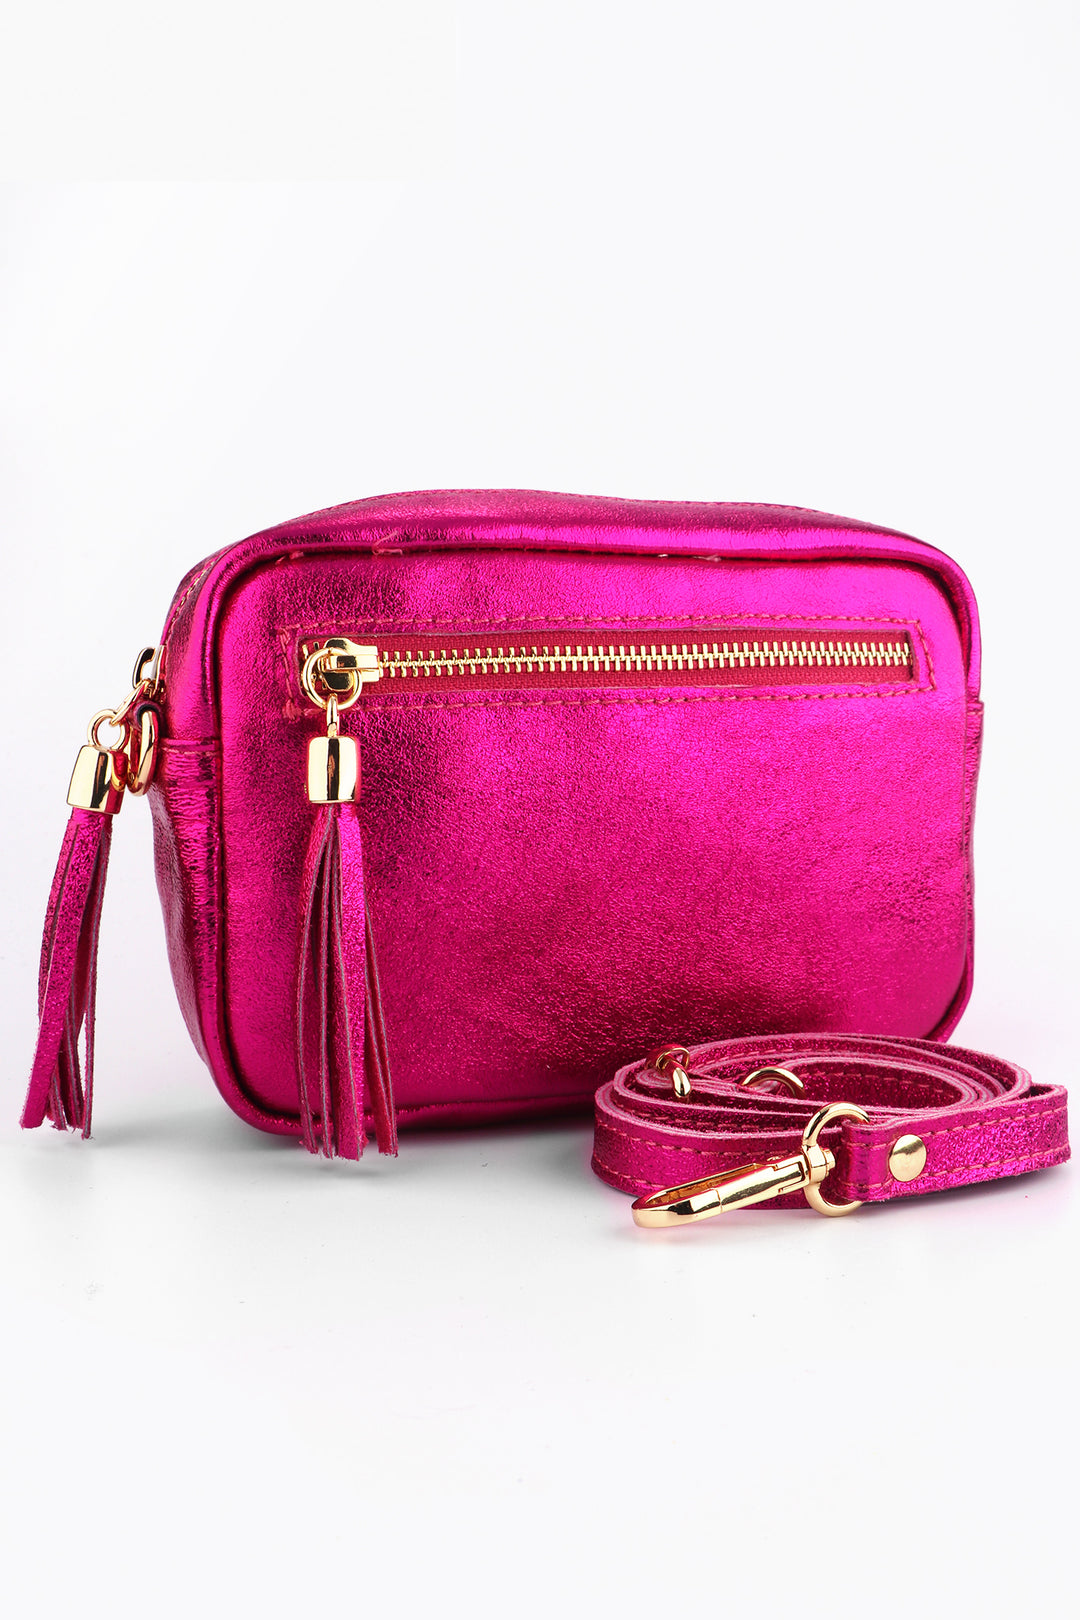 a metallic vibrant pink genuine leather crossbody bag with two zipper compartments